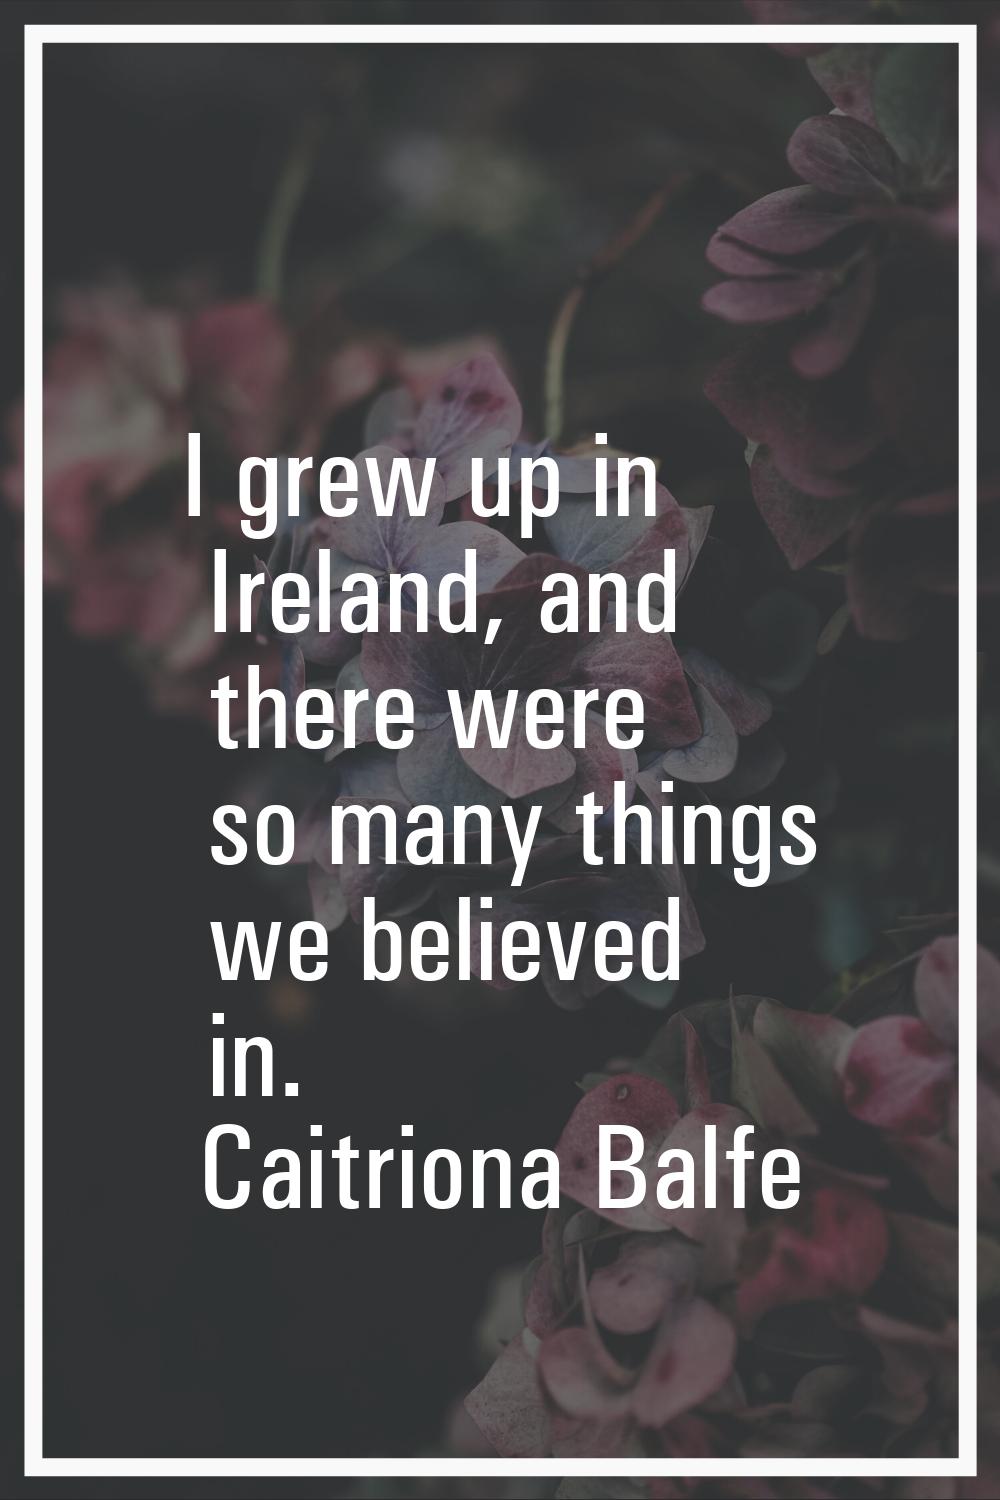 I grew up in Ireland, and there were so many things we believed in.